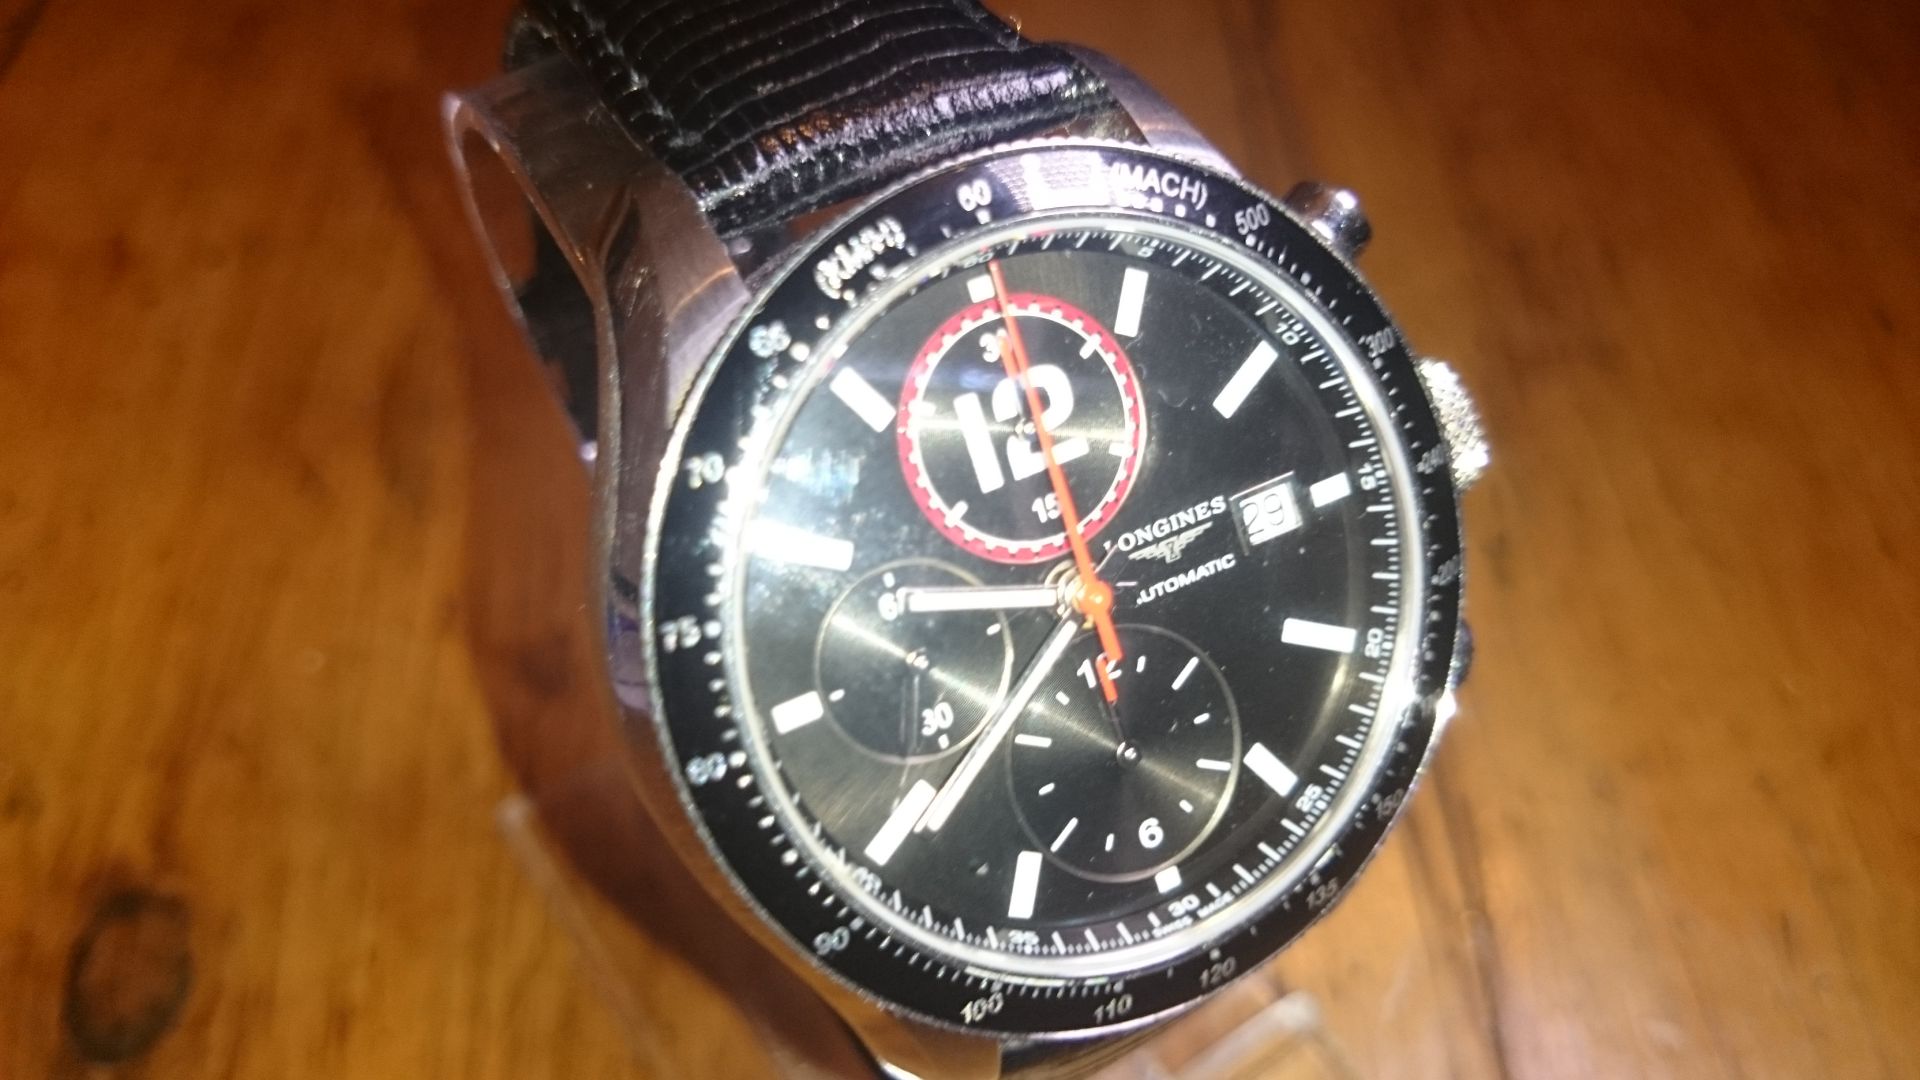 Longines Chronograph watch in excellent condition with glass back.Model number L667.2 The watch